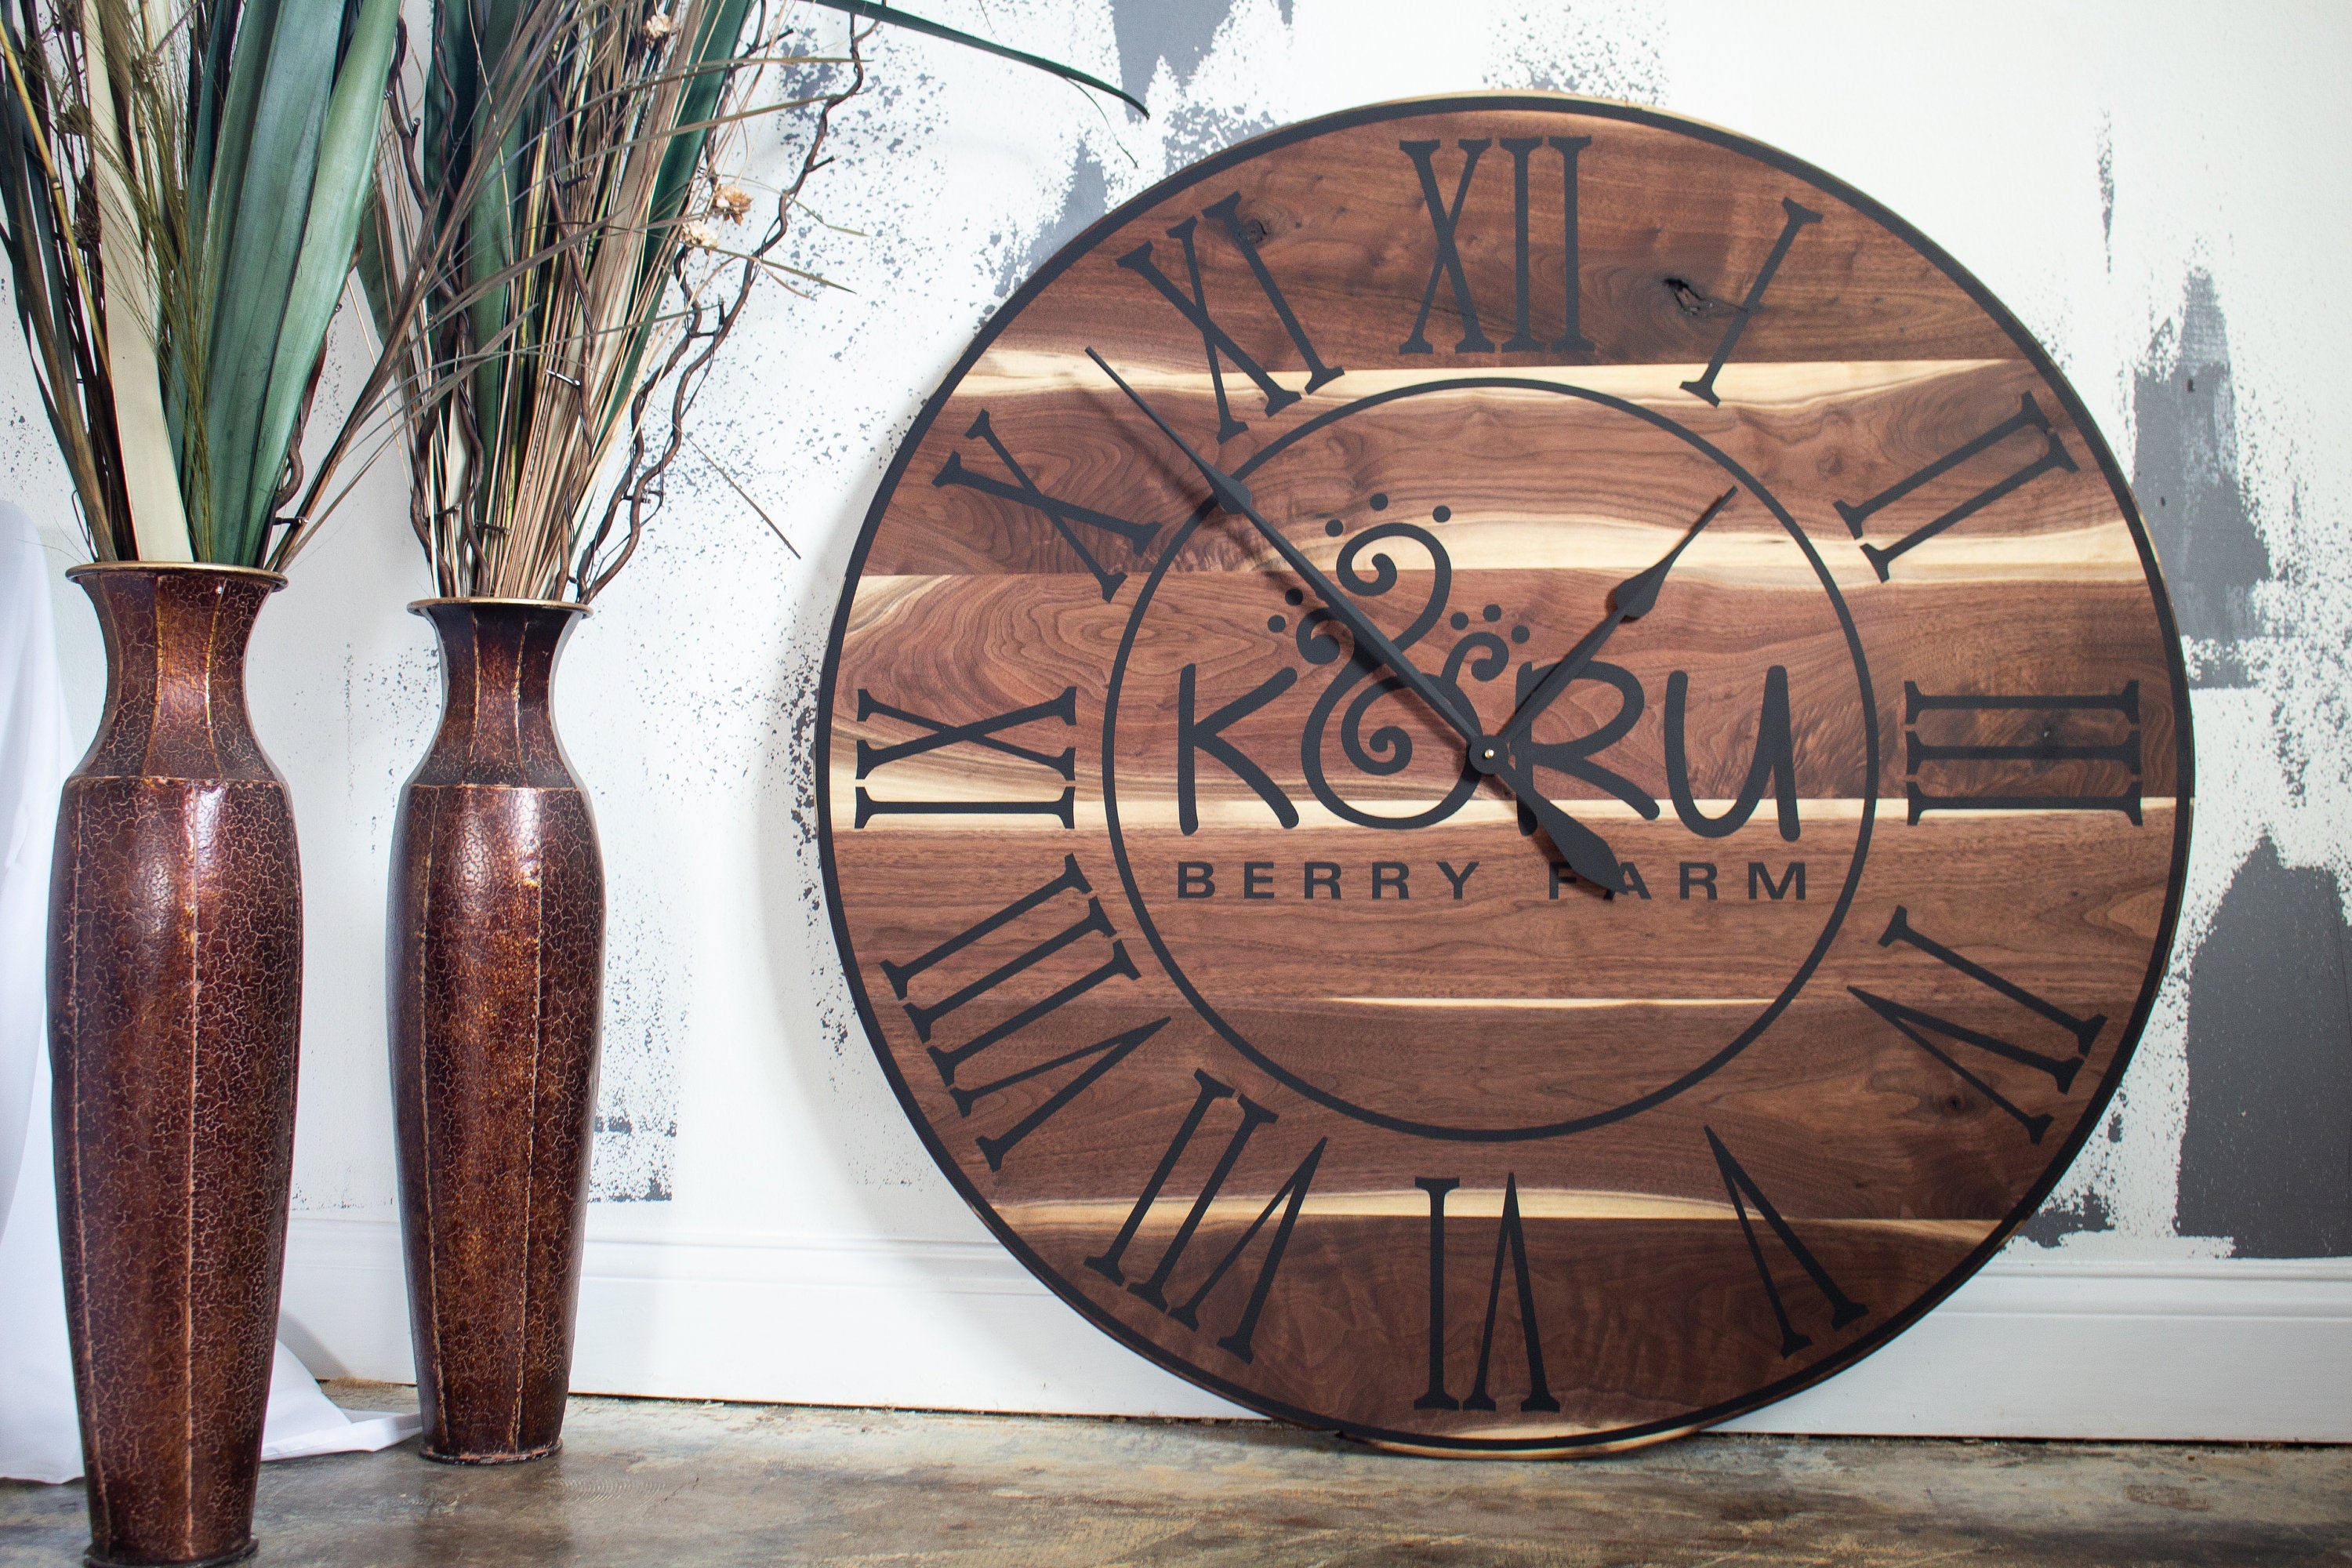 Live Edge Black Walnut Oversized Wall Clock with Black Lines and Roman Numerals